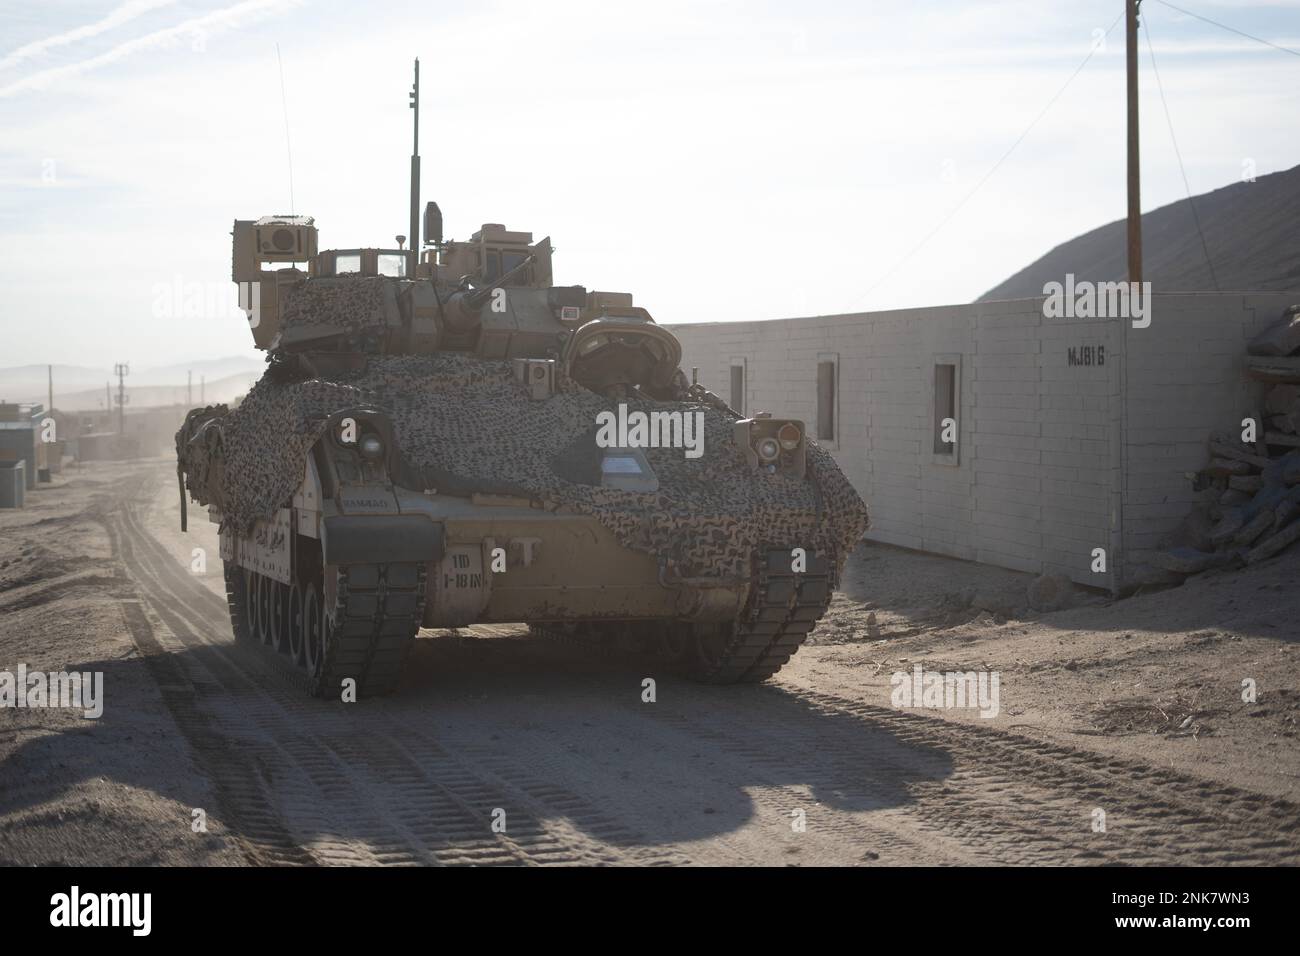 U.S. Soldiers assigned to 1st Battalion, 18th Infantry Regiment, 2nd Armored Brigade Combat Team, 1st Infantry Division maneuver a Bradley Fighting Vehicle through the town of Razish during Decisive Action Rotation 22-09 at the National Training Center, Fort Irwin, Calif., Aug 11th, 2022. Stock Photo